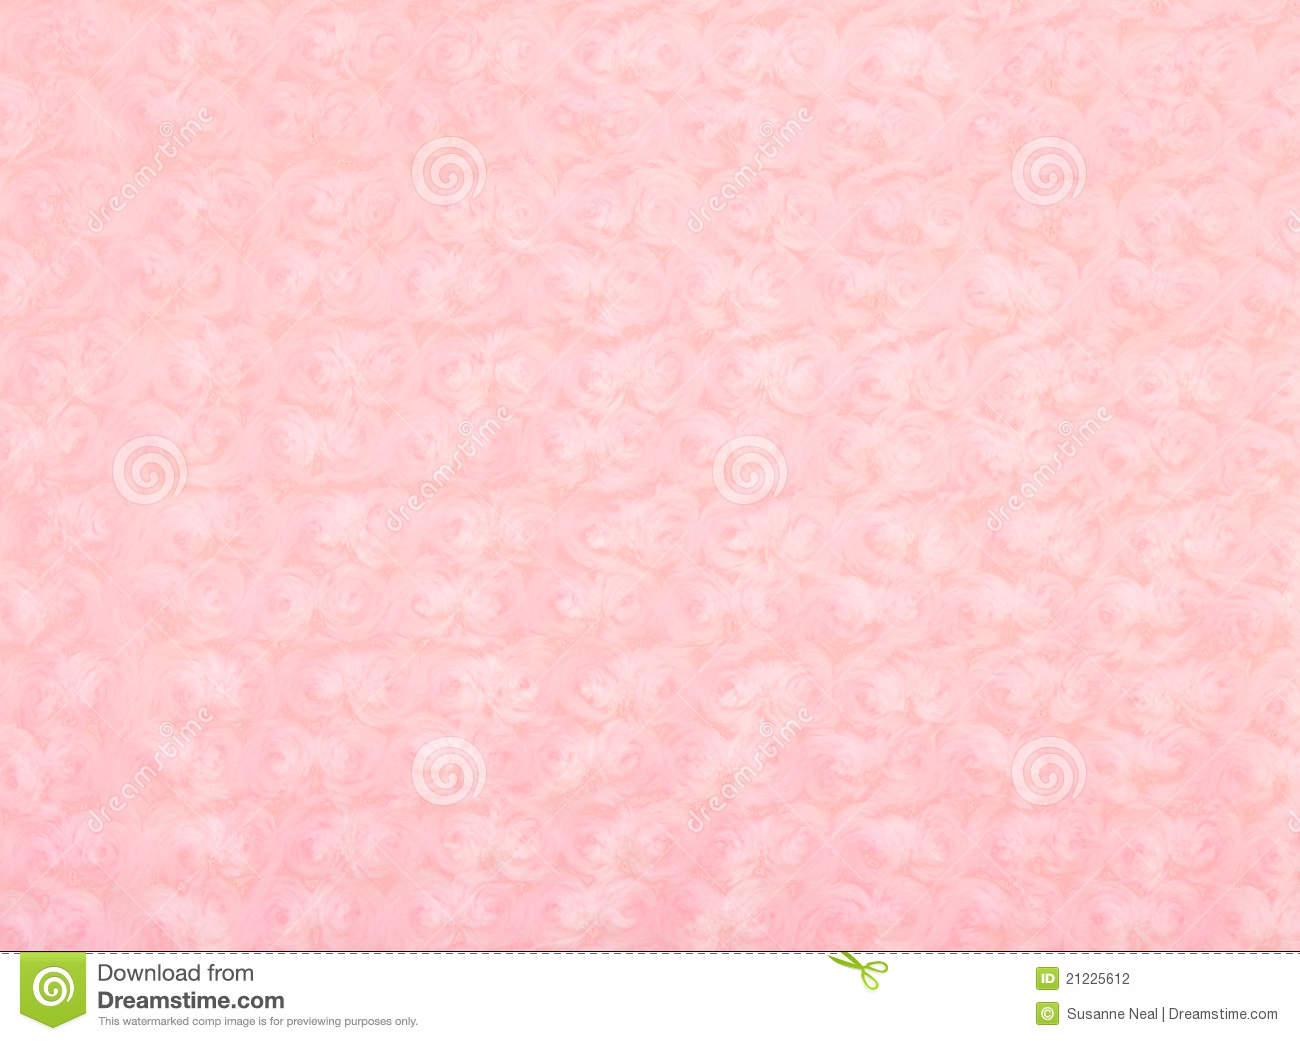 Soft Pink Textured Blanket Covered With Roses  Design Is Of Just The